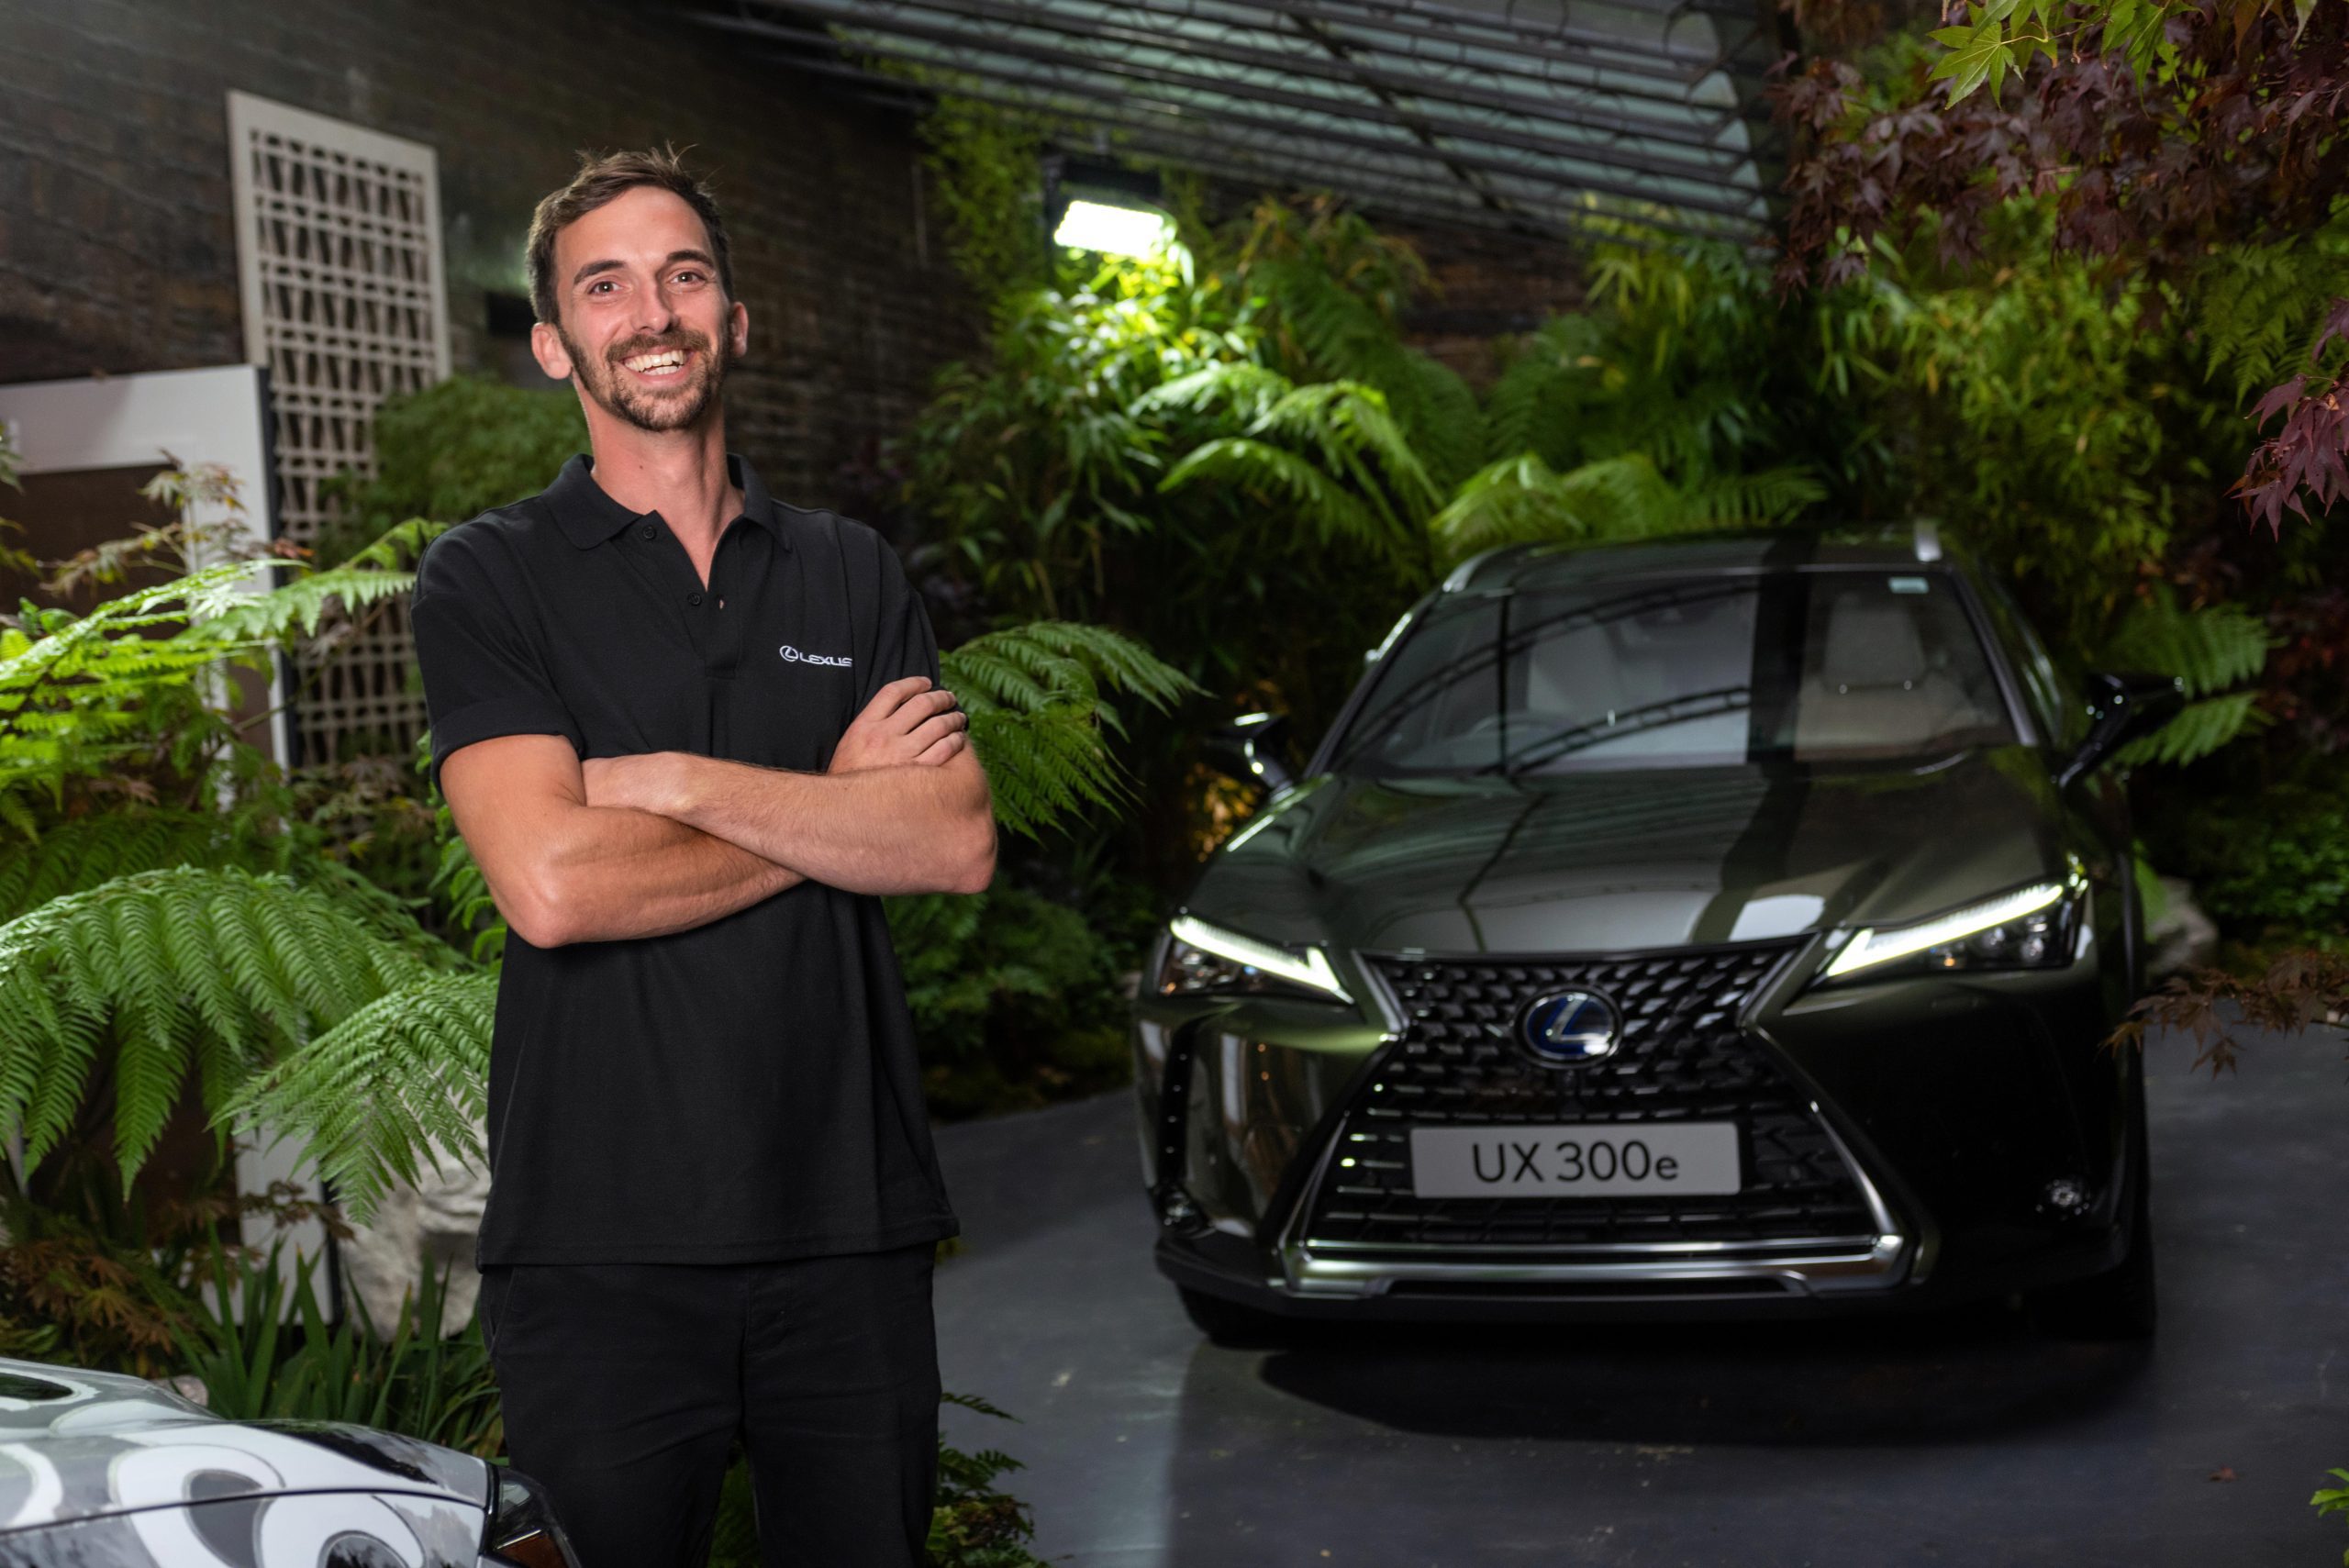 A brand ambassador poses for a photo in front of a Lexus at a brand activation event in central London for Lexus at Japan Week. The image embodies the essence of brand engagement and ambassadorship, captured by Wright Content.